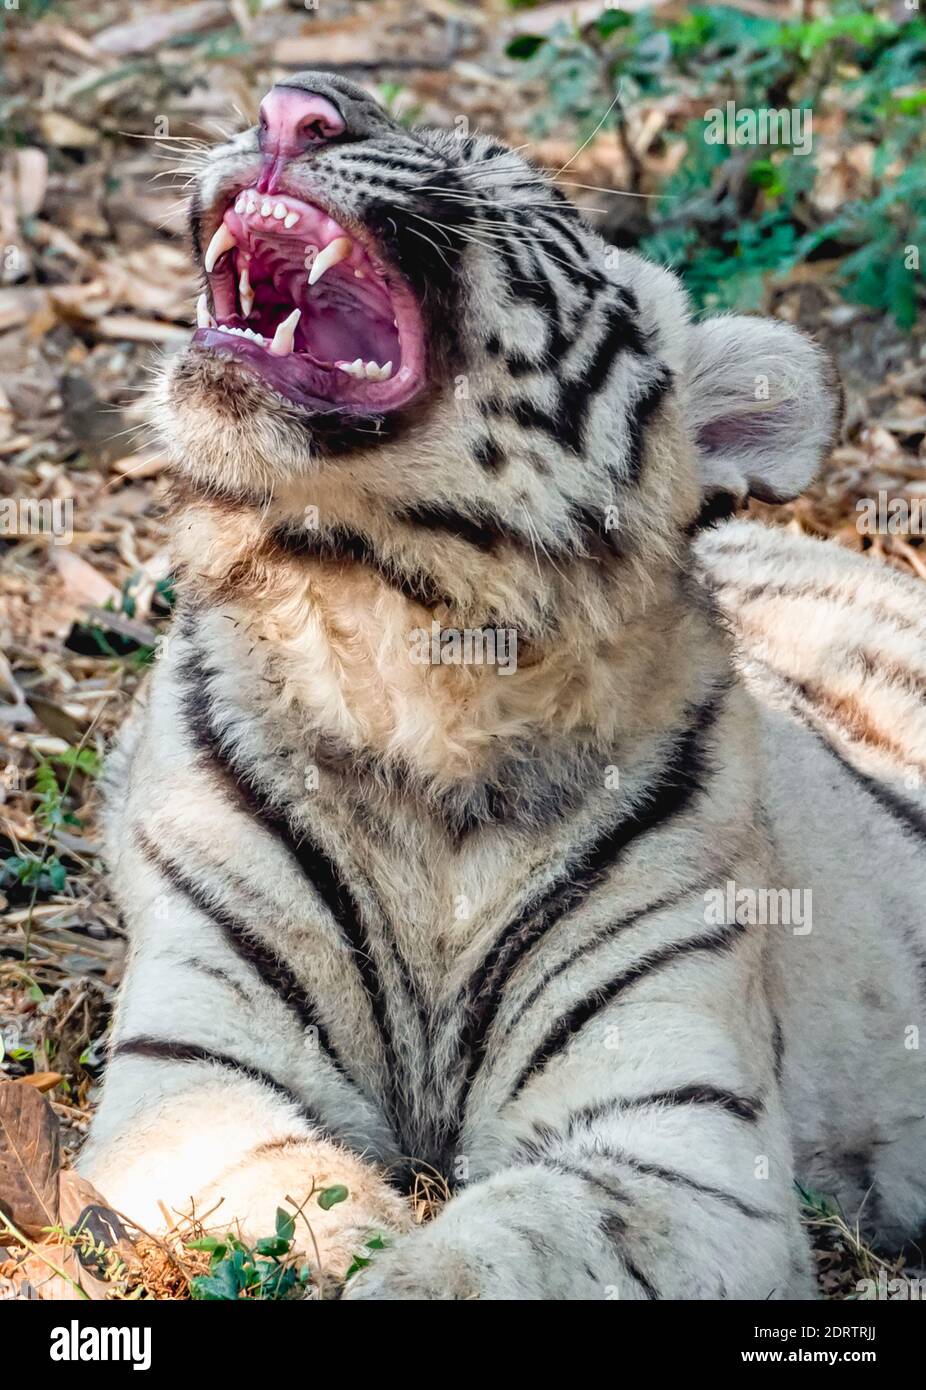 A white tiger cub, with its mouth partially open, in the tiger enclosure at the National Zoological Park Delhi, also known as the Delhi Zoo. Stock Photo